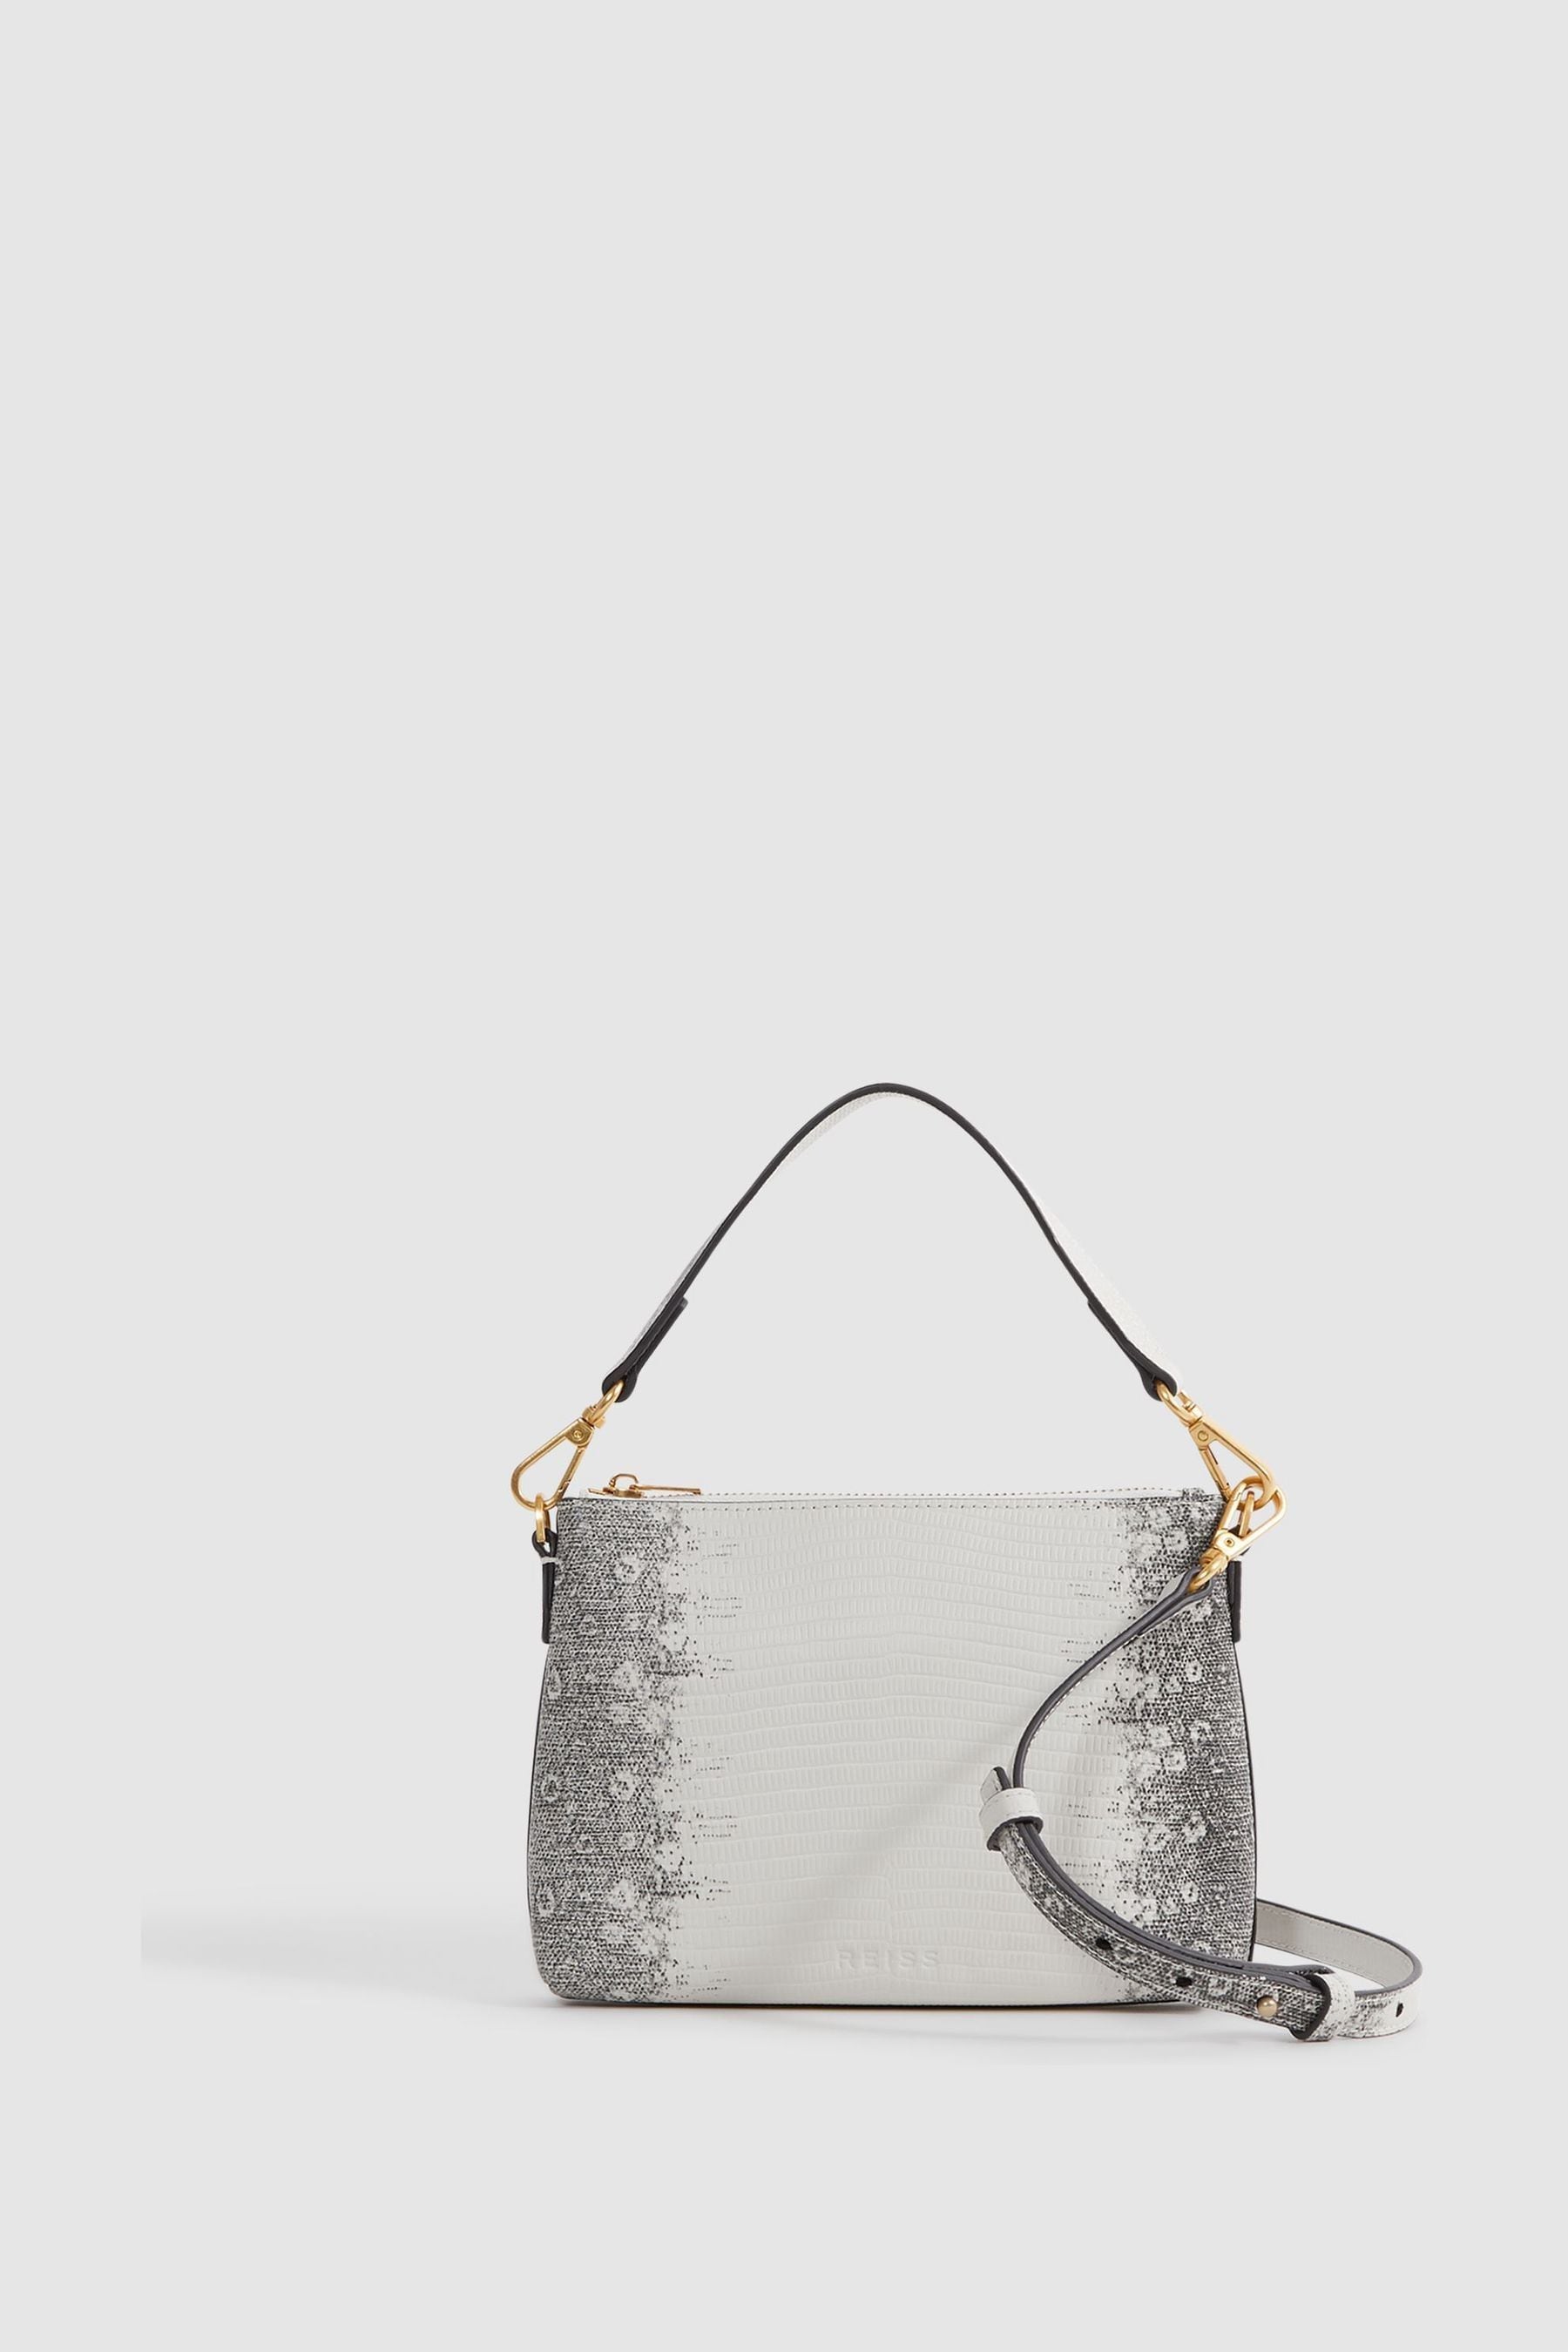 Reiss Brompton - Grey/white Leather Double Strap Pouch Bag, One